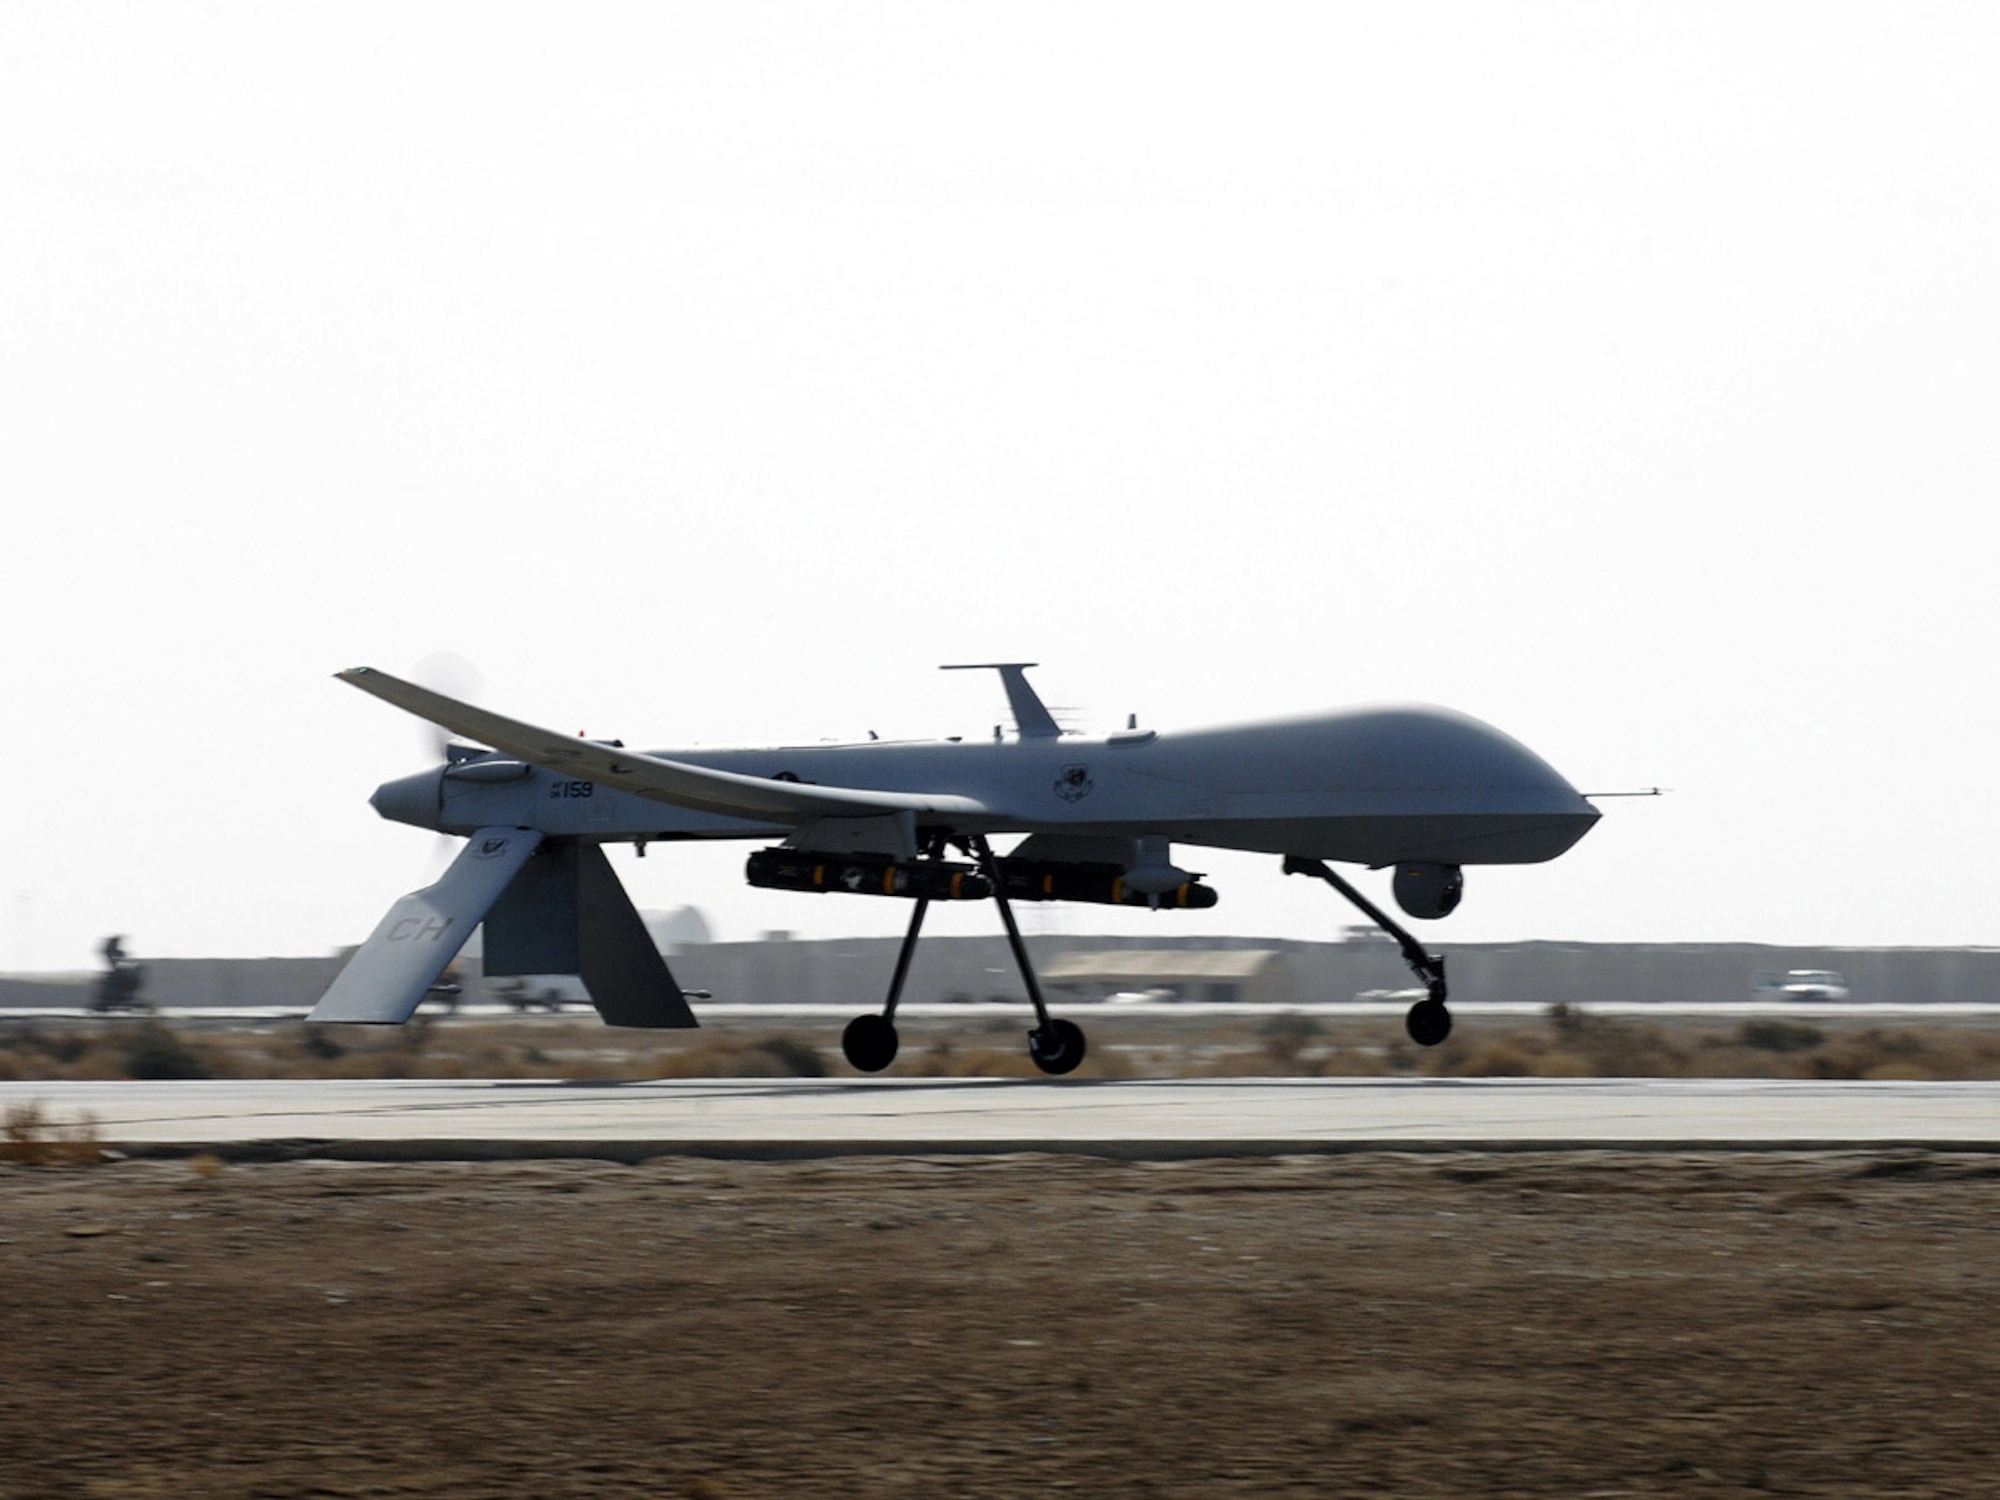 An Air Force MQ-1 Predator from the 361st Expeditionary Reconnaissance Squadron takes off from Ali Base, Iraq, in support of Operation Iraqi Freedom. The Predator is a medium-altitude, long-endurance, remotely piloted aircraft capable of conducting armed reconnaissance. (U.S. Air Force photo/Airman 1st Class Jonathan Snyder) 
